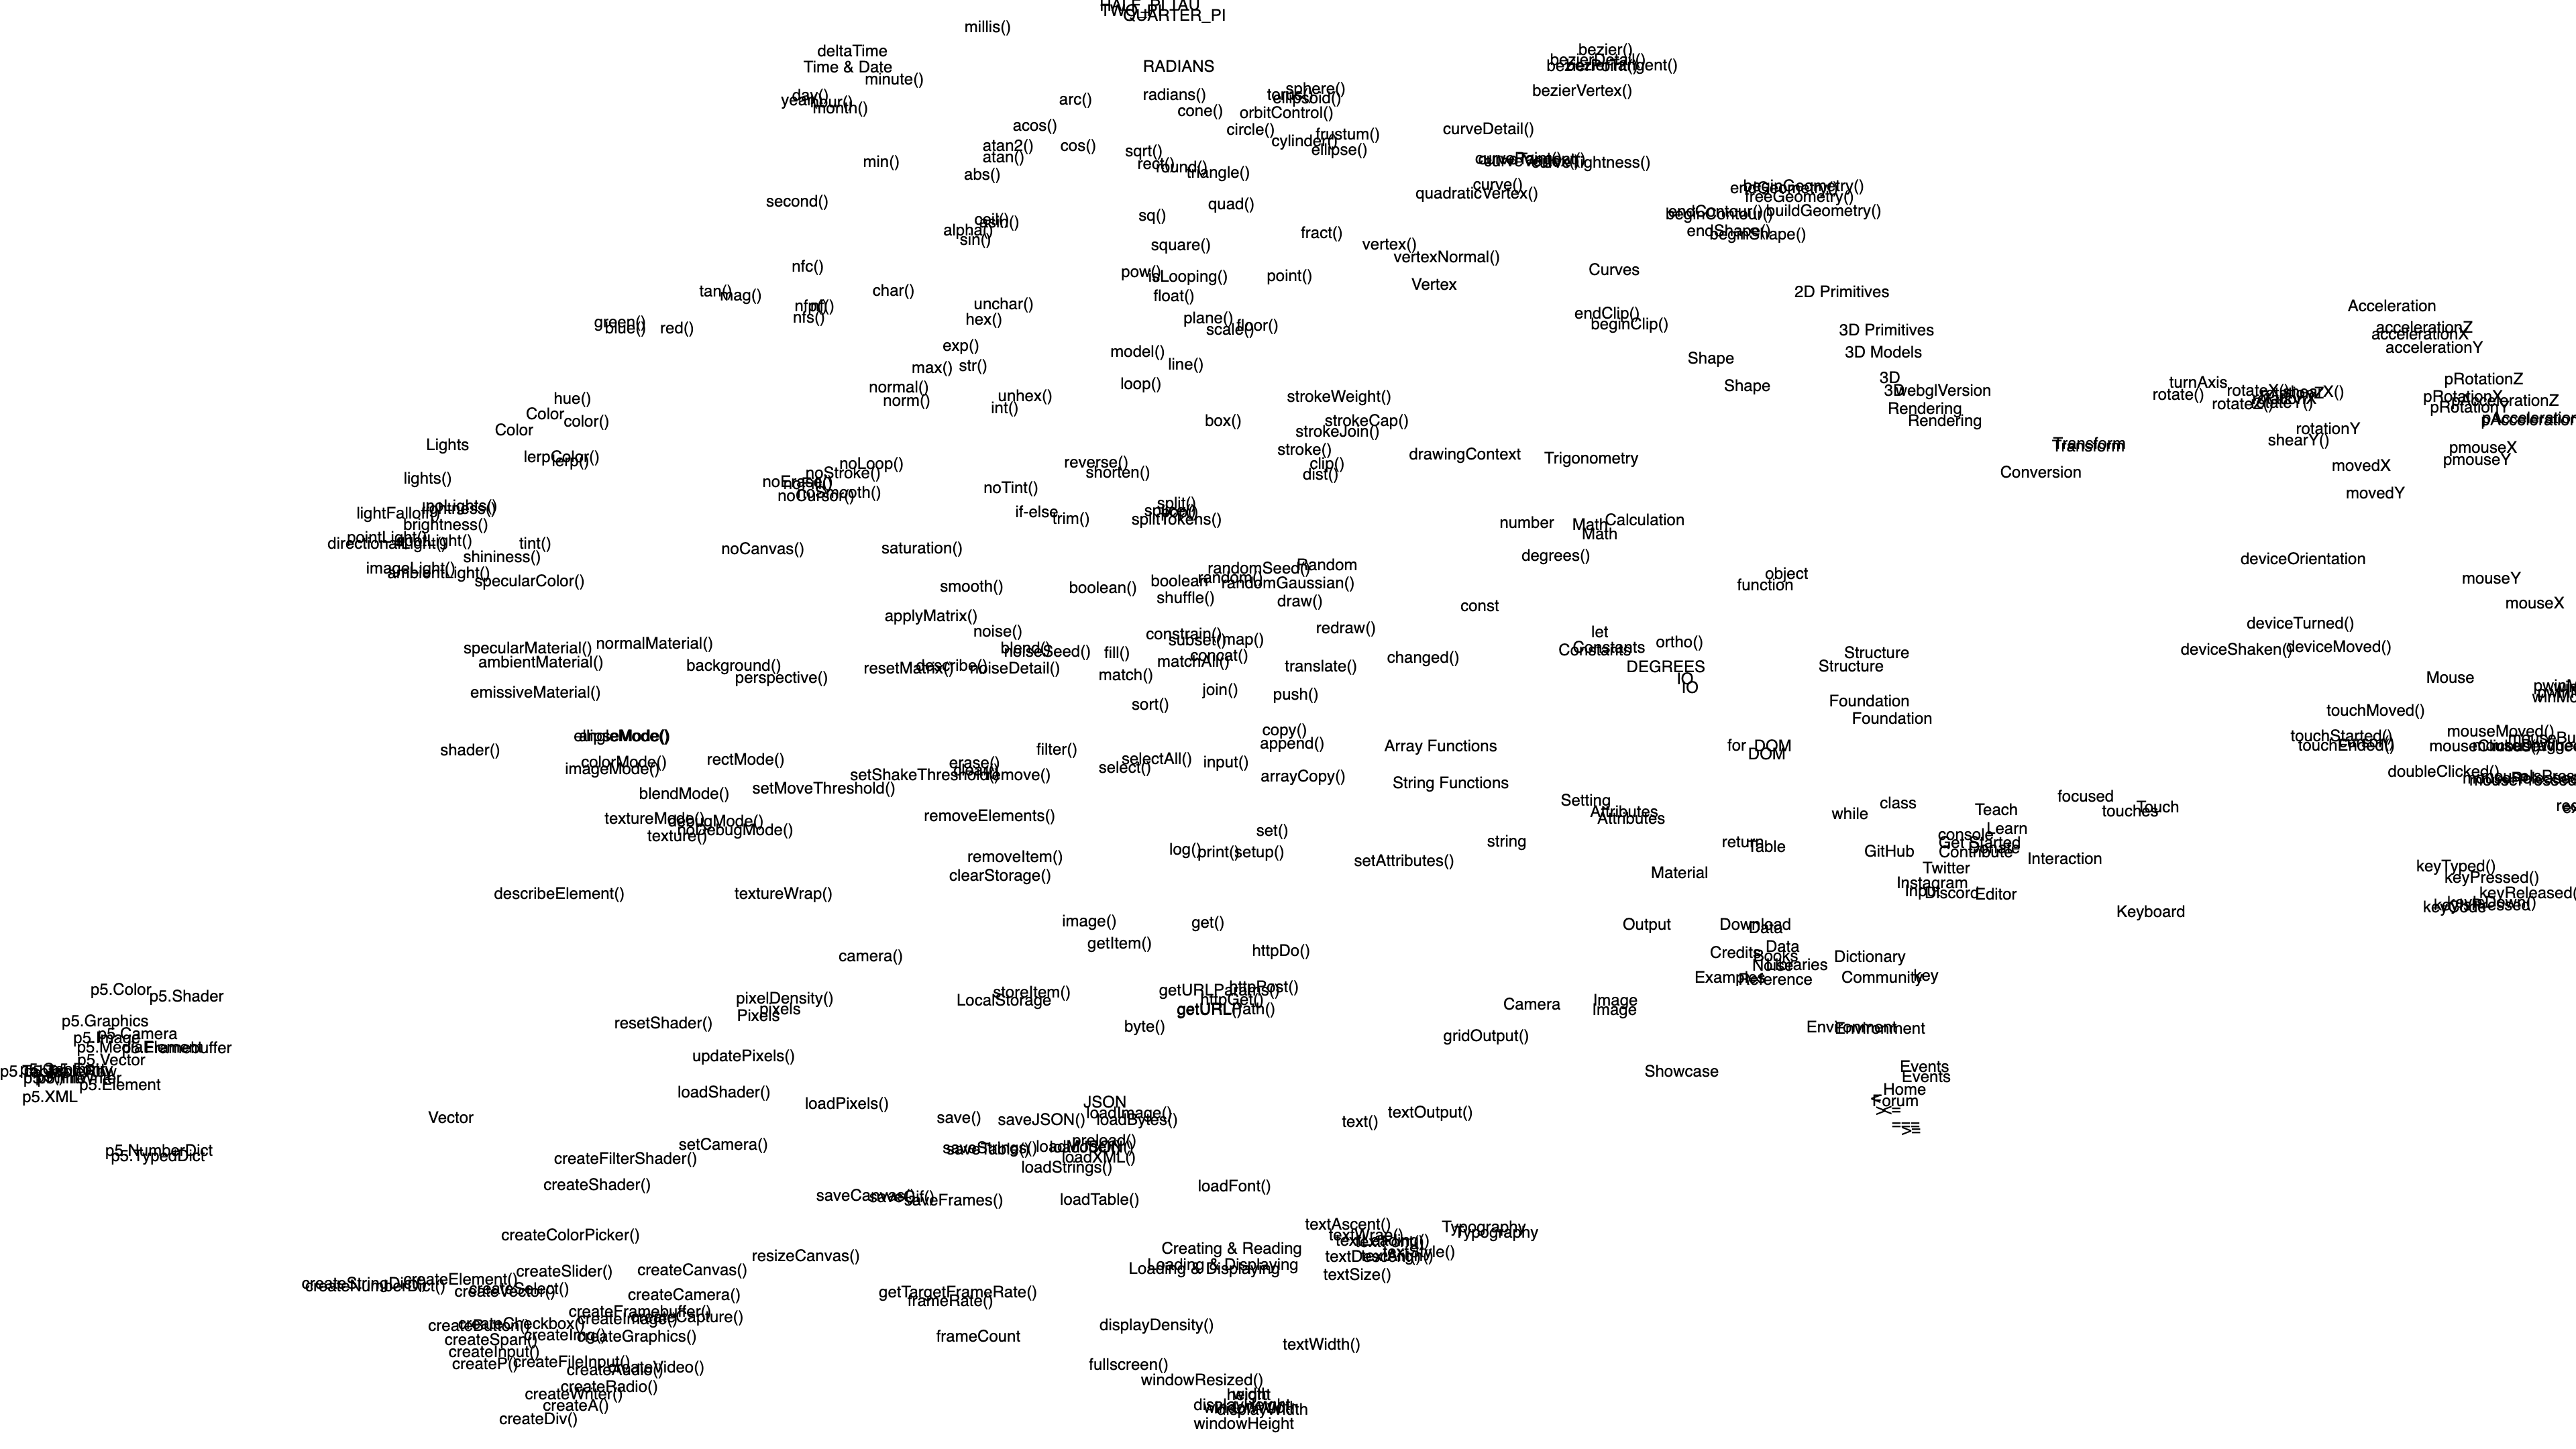 A map of clustered p5.js function names